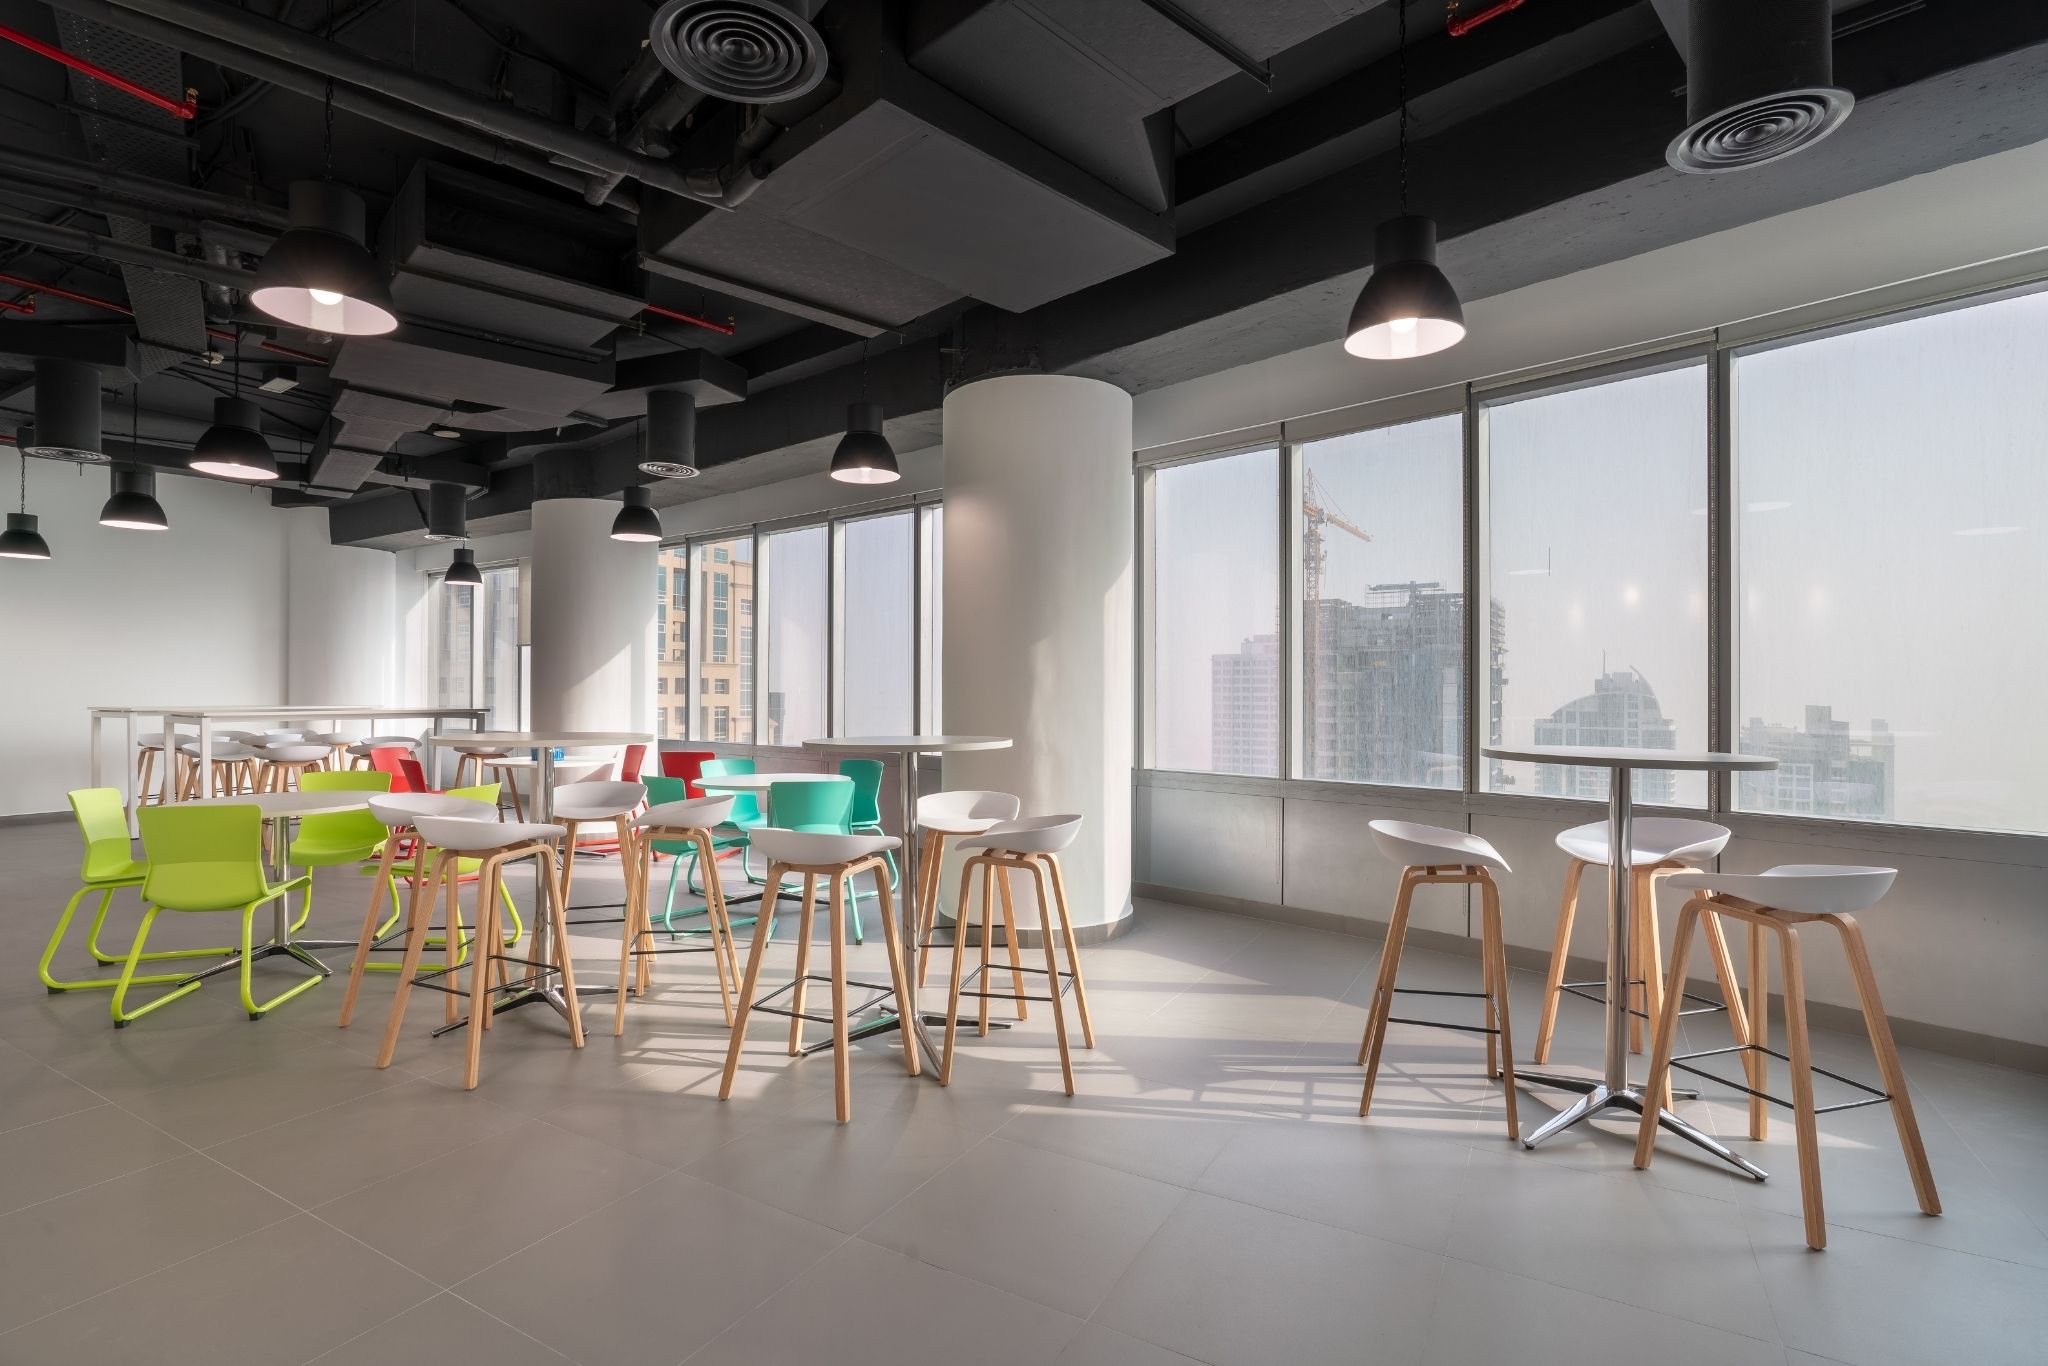 Renault regional office in Dubai design and build by Motif Interiors9